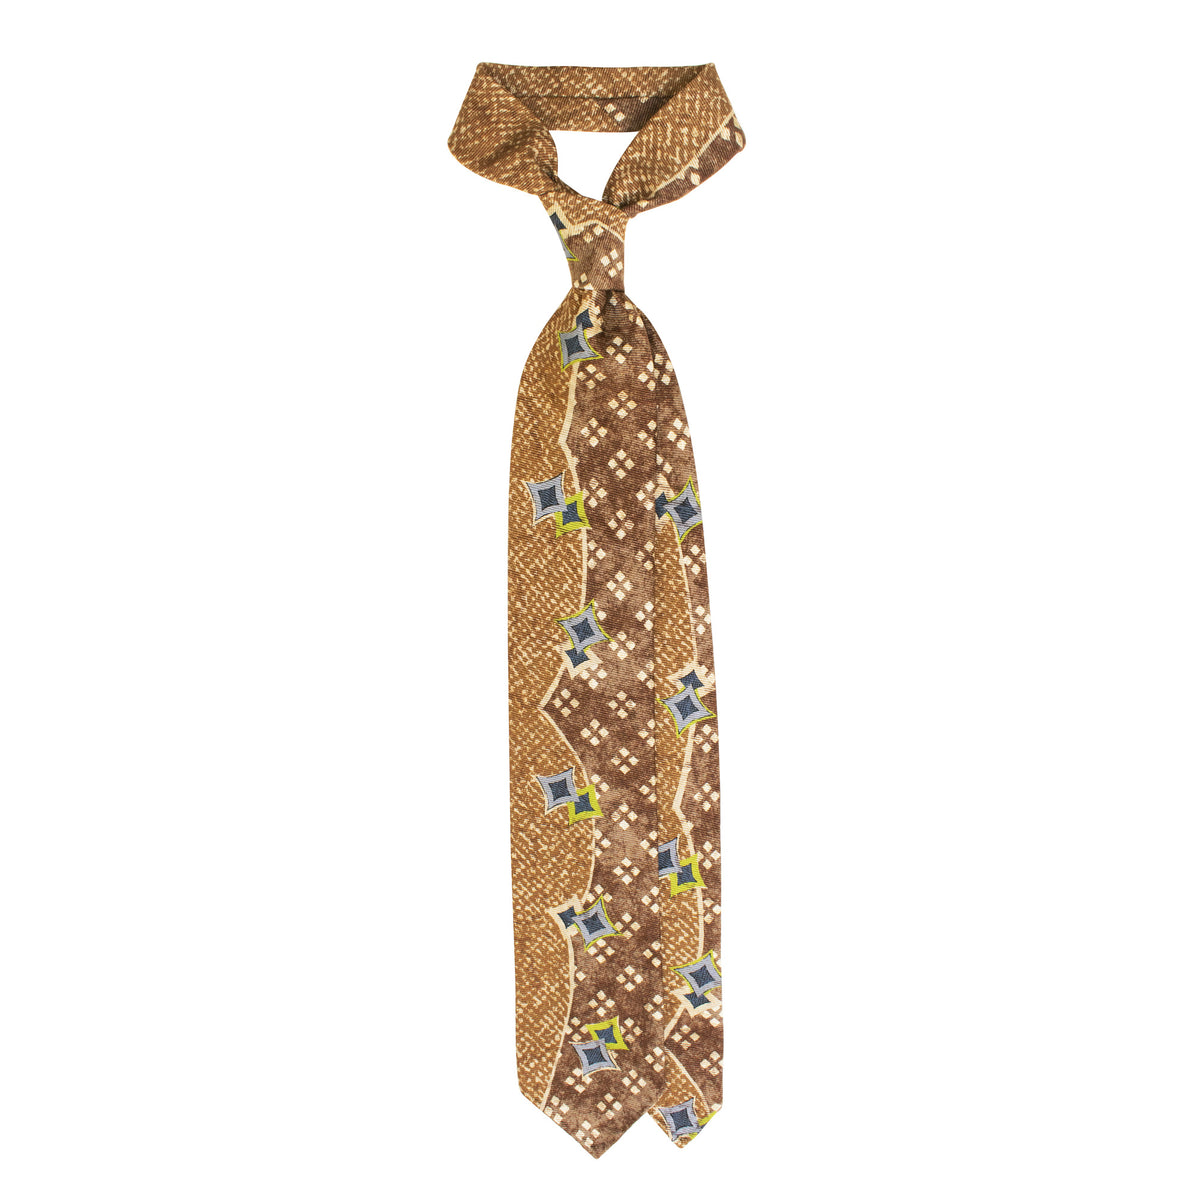 ALL OVER ABSTRACT PATTERN PRINTED SILK TIE SSDF12.A